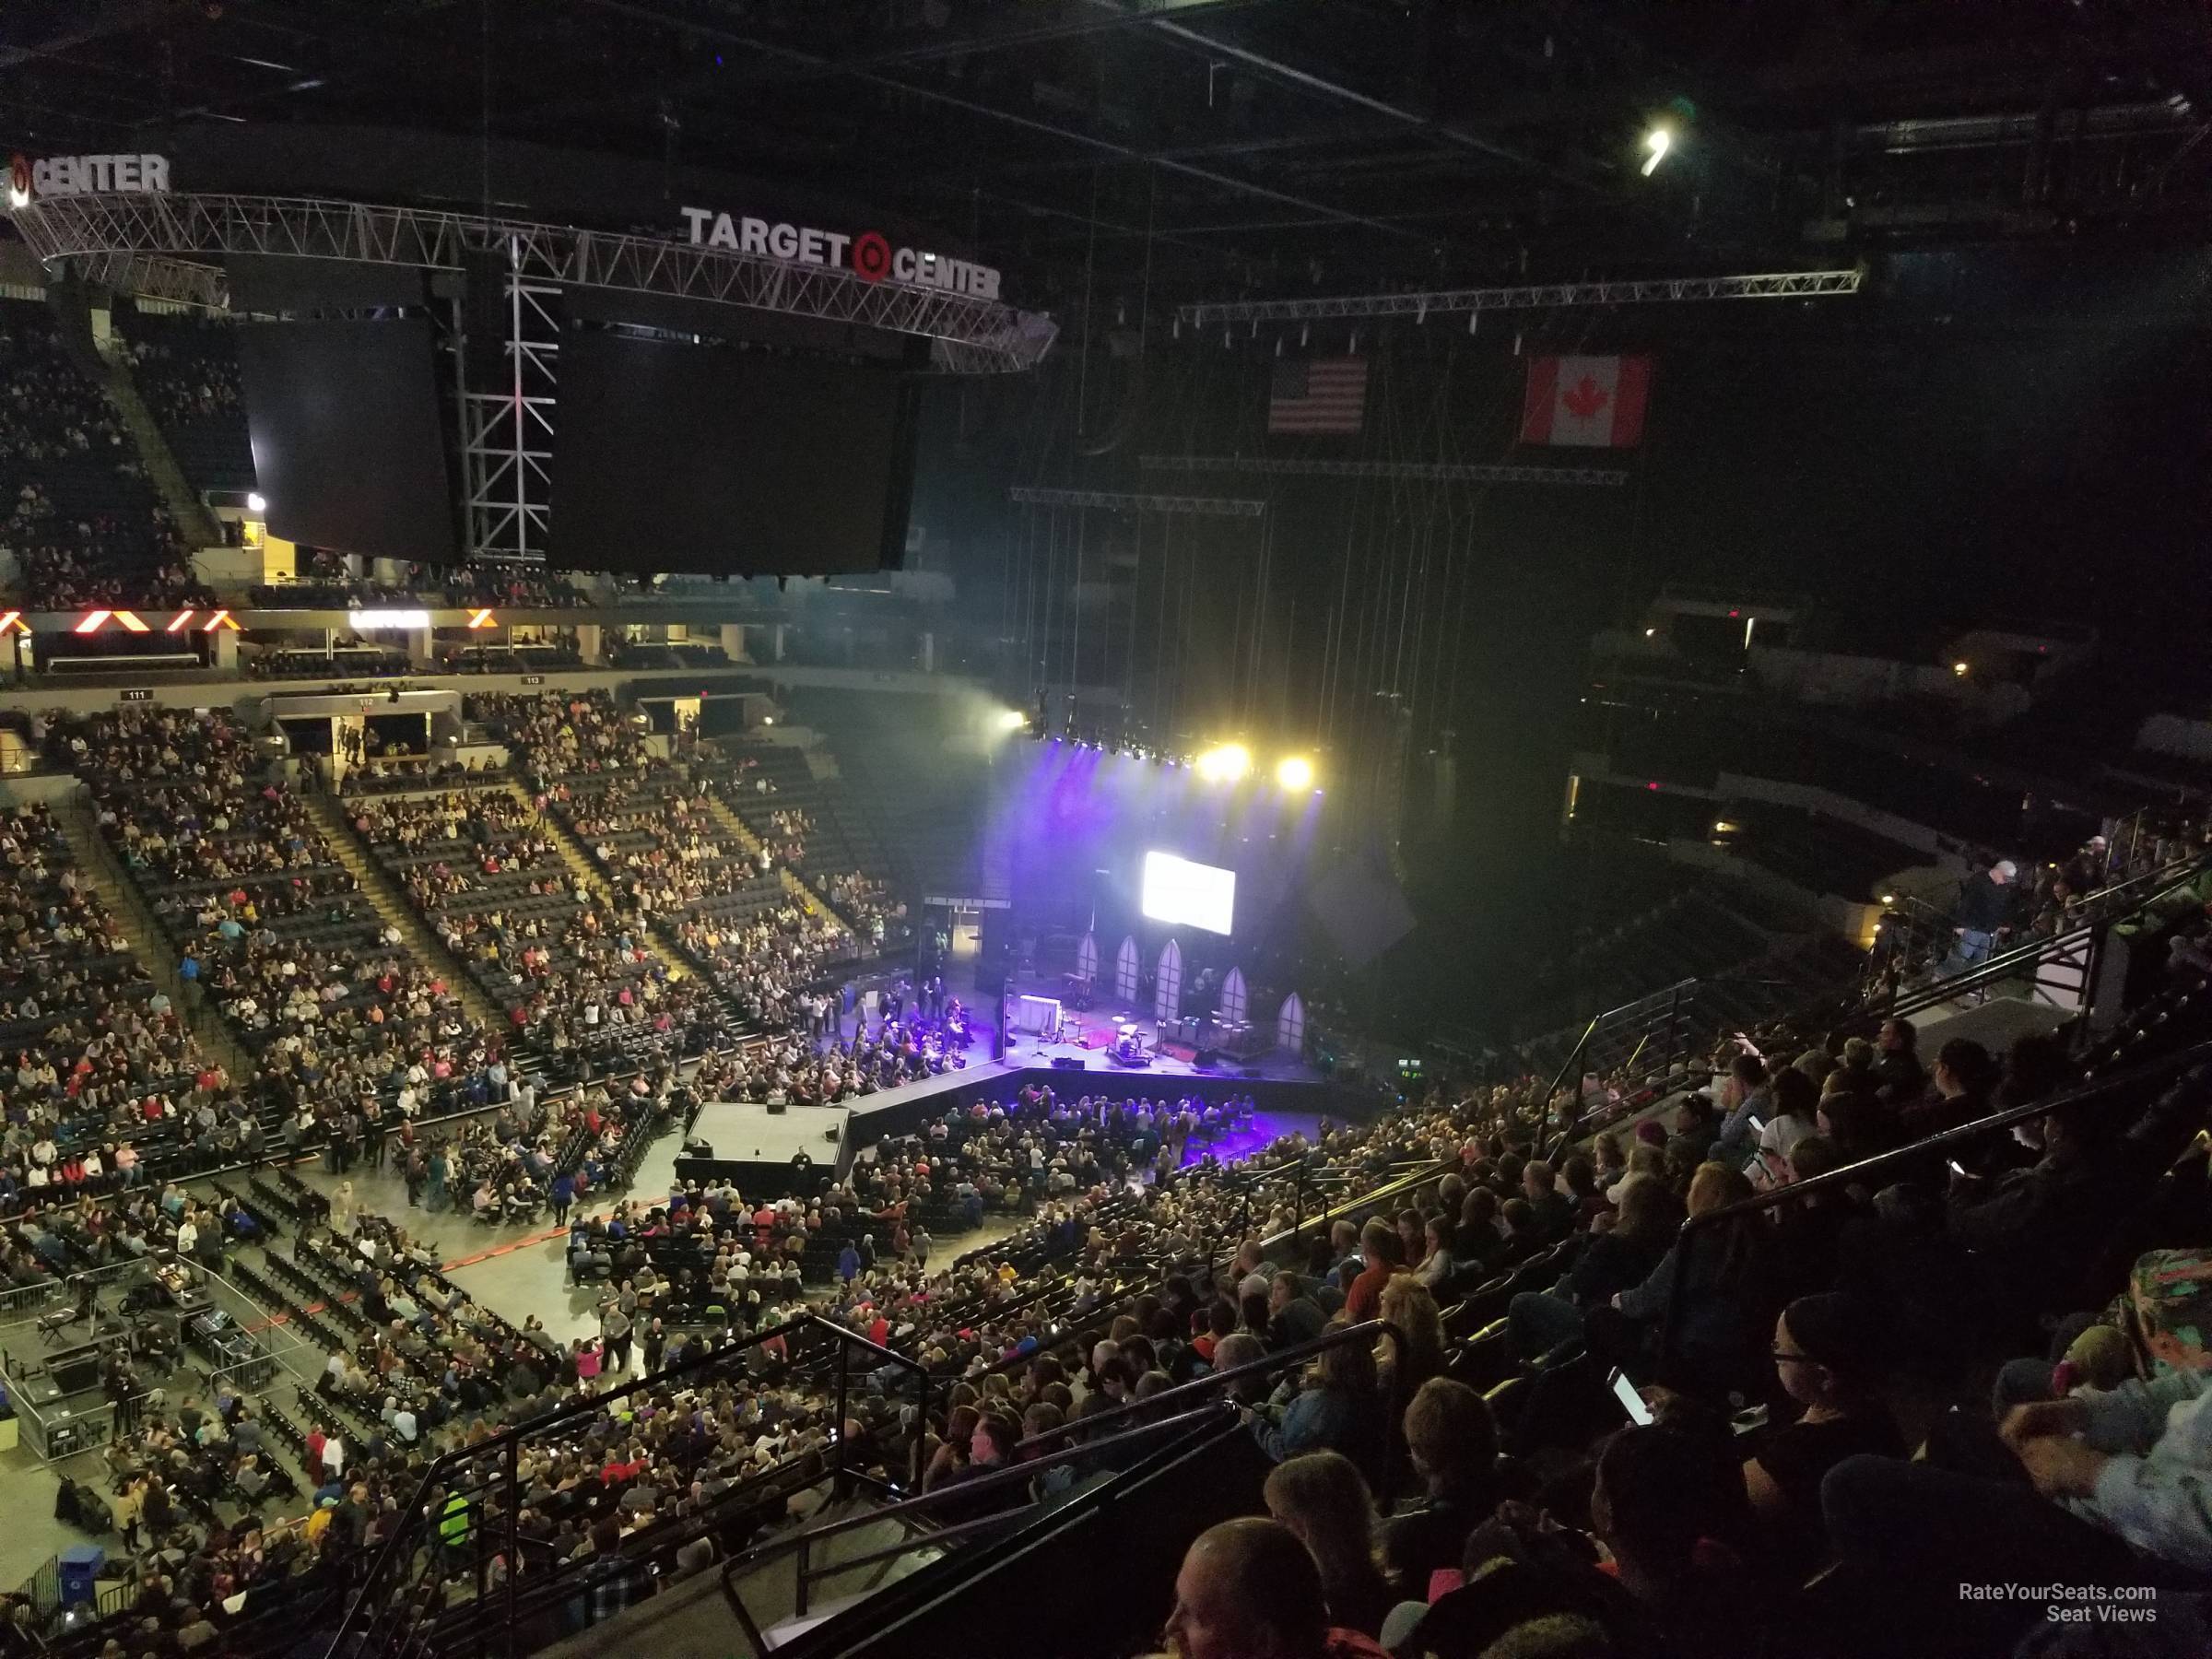 Target Center Section 234 Concert Seating - RateYourSeats.com